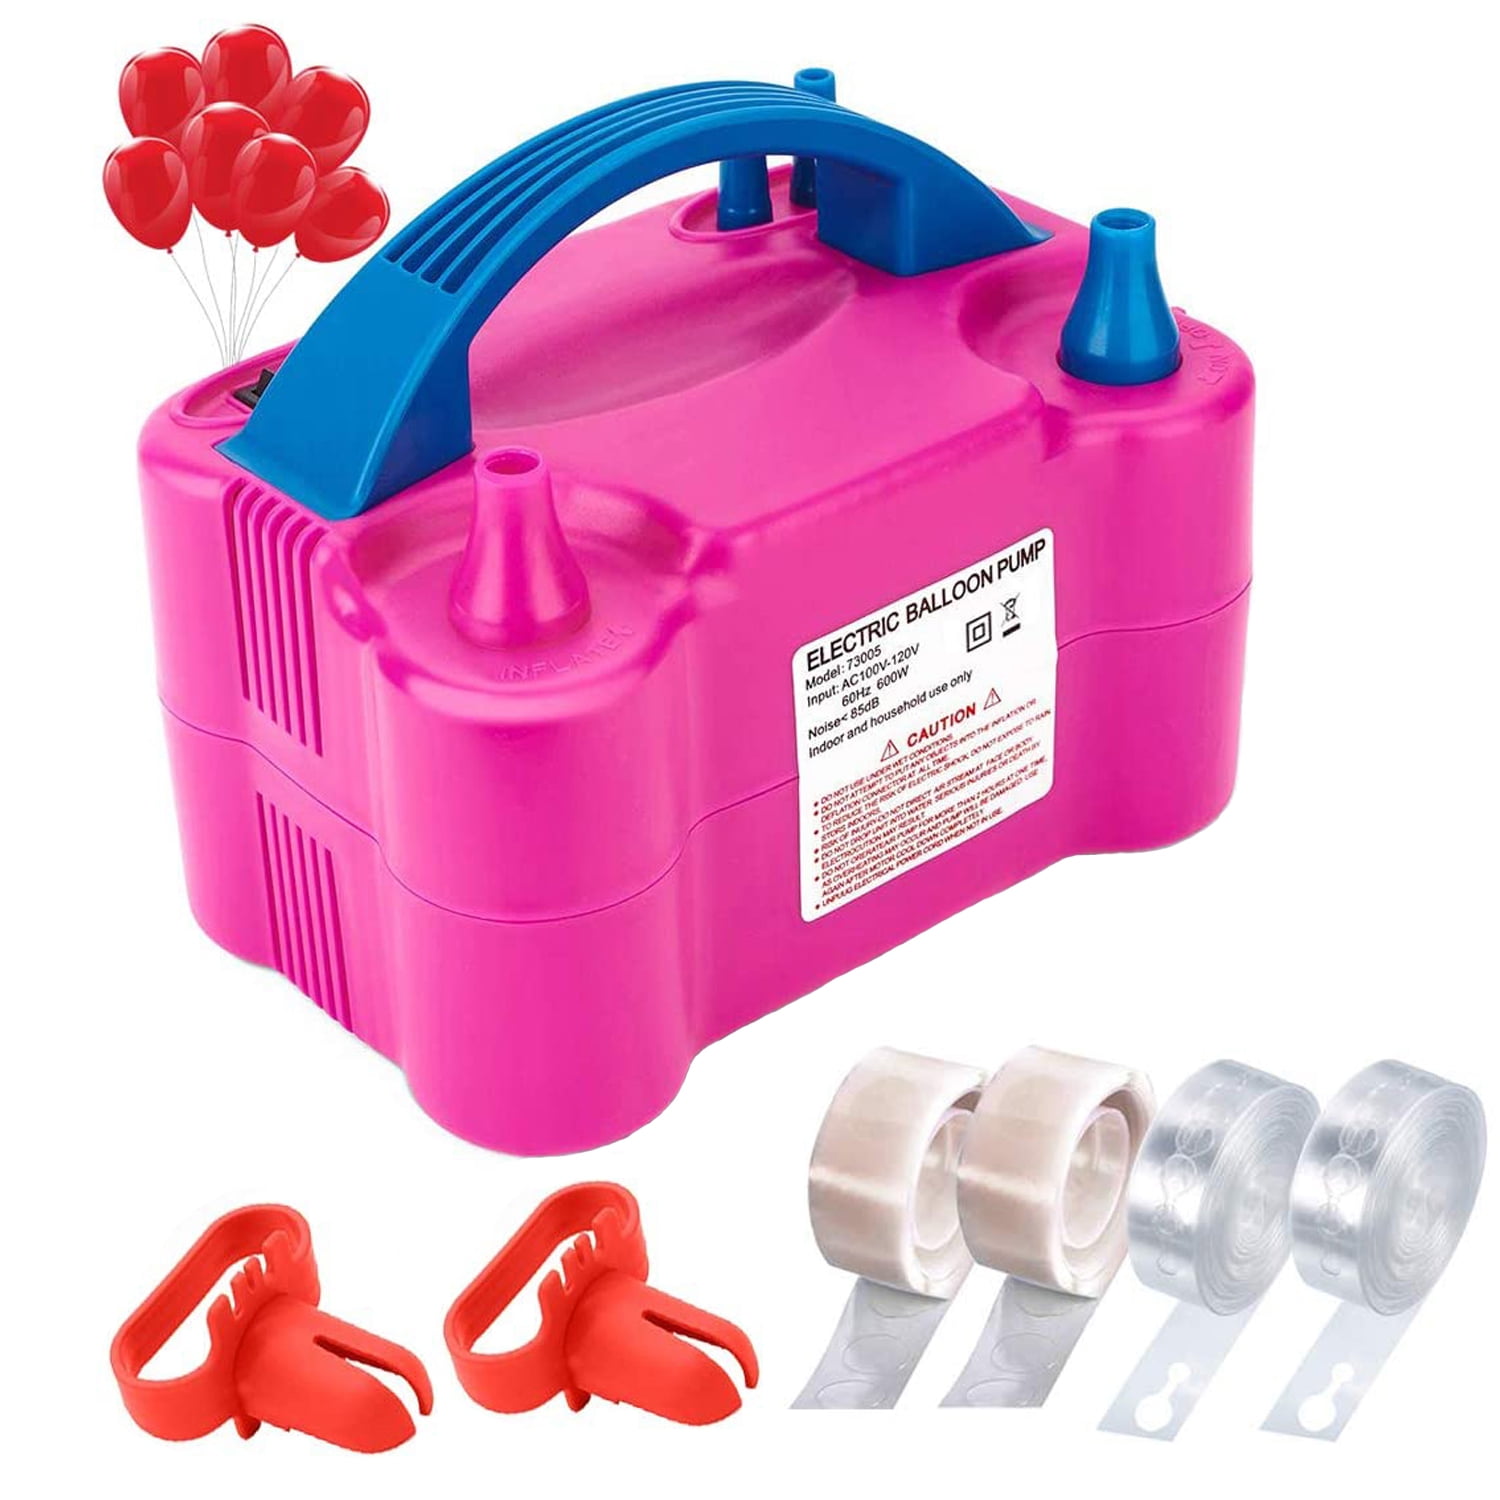 Air pump electric balloon pump portable pump double nozzle pink butterfly air pump 110V electric balloon blowing/inflating machine with multi-purpose hose extension pipe and nozzle inflatable sofa swimming pool buoy compression bag party decoration air pum 